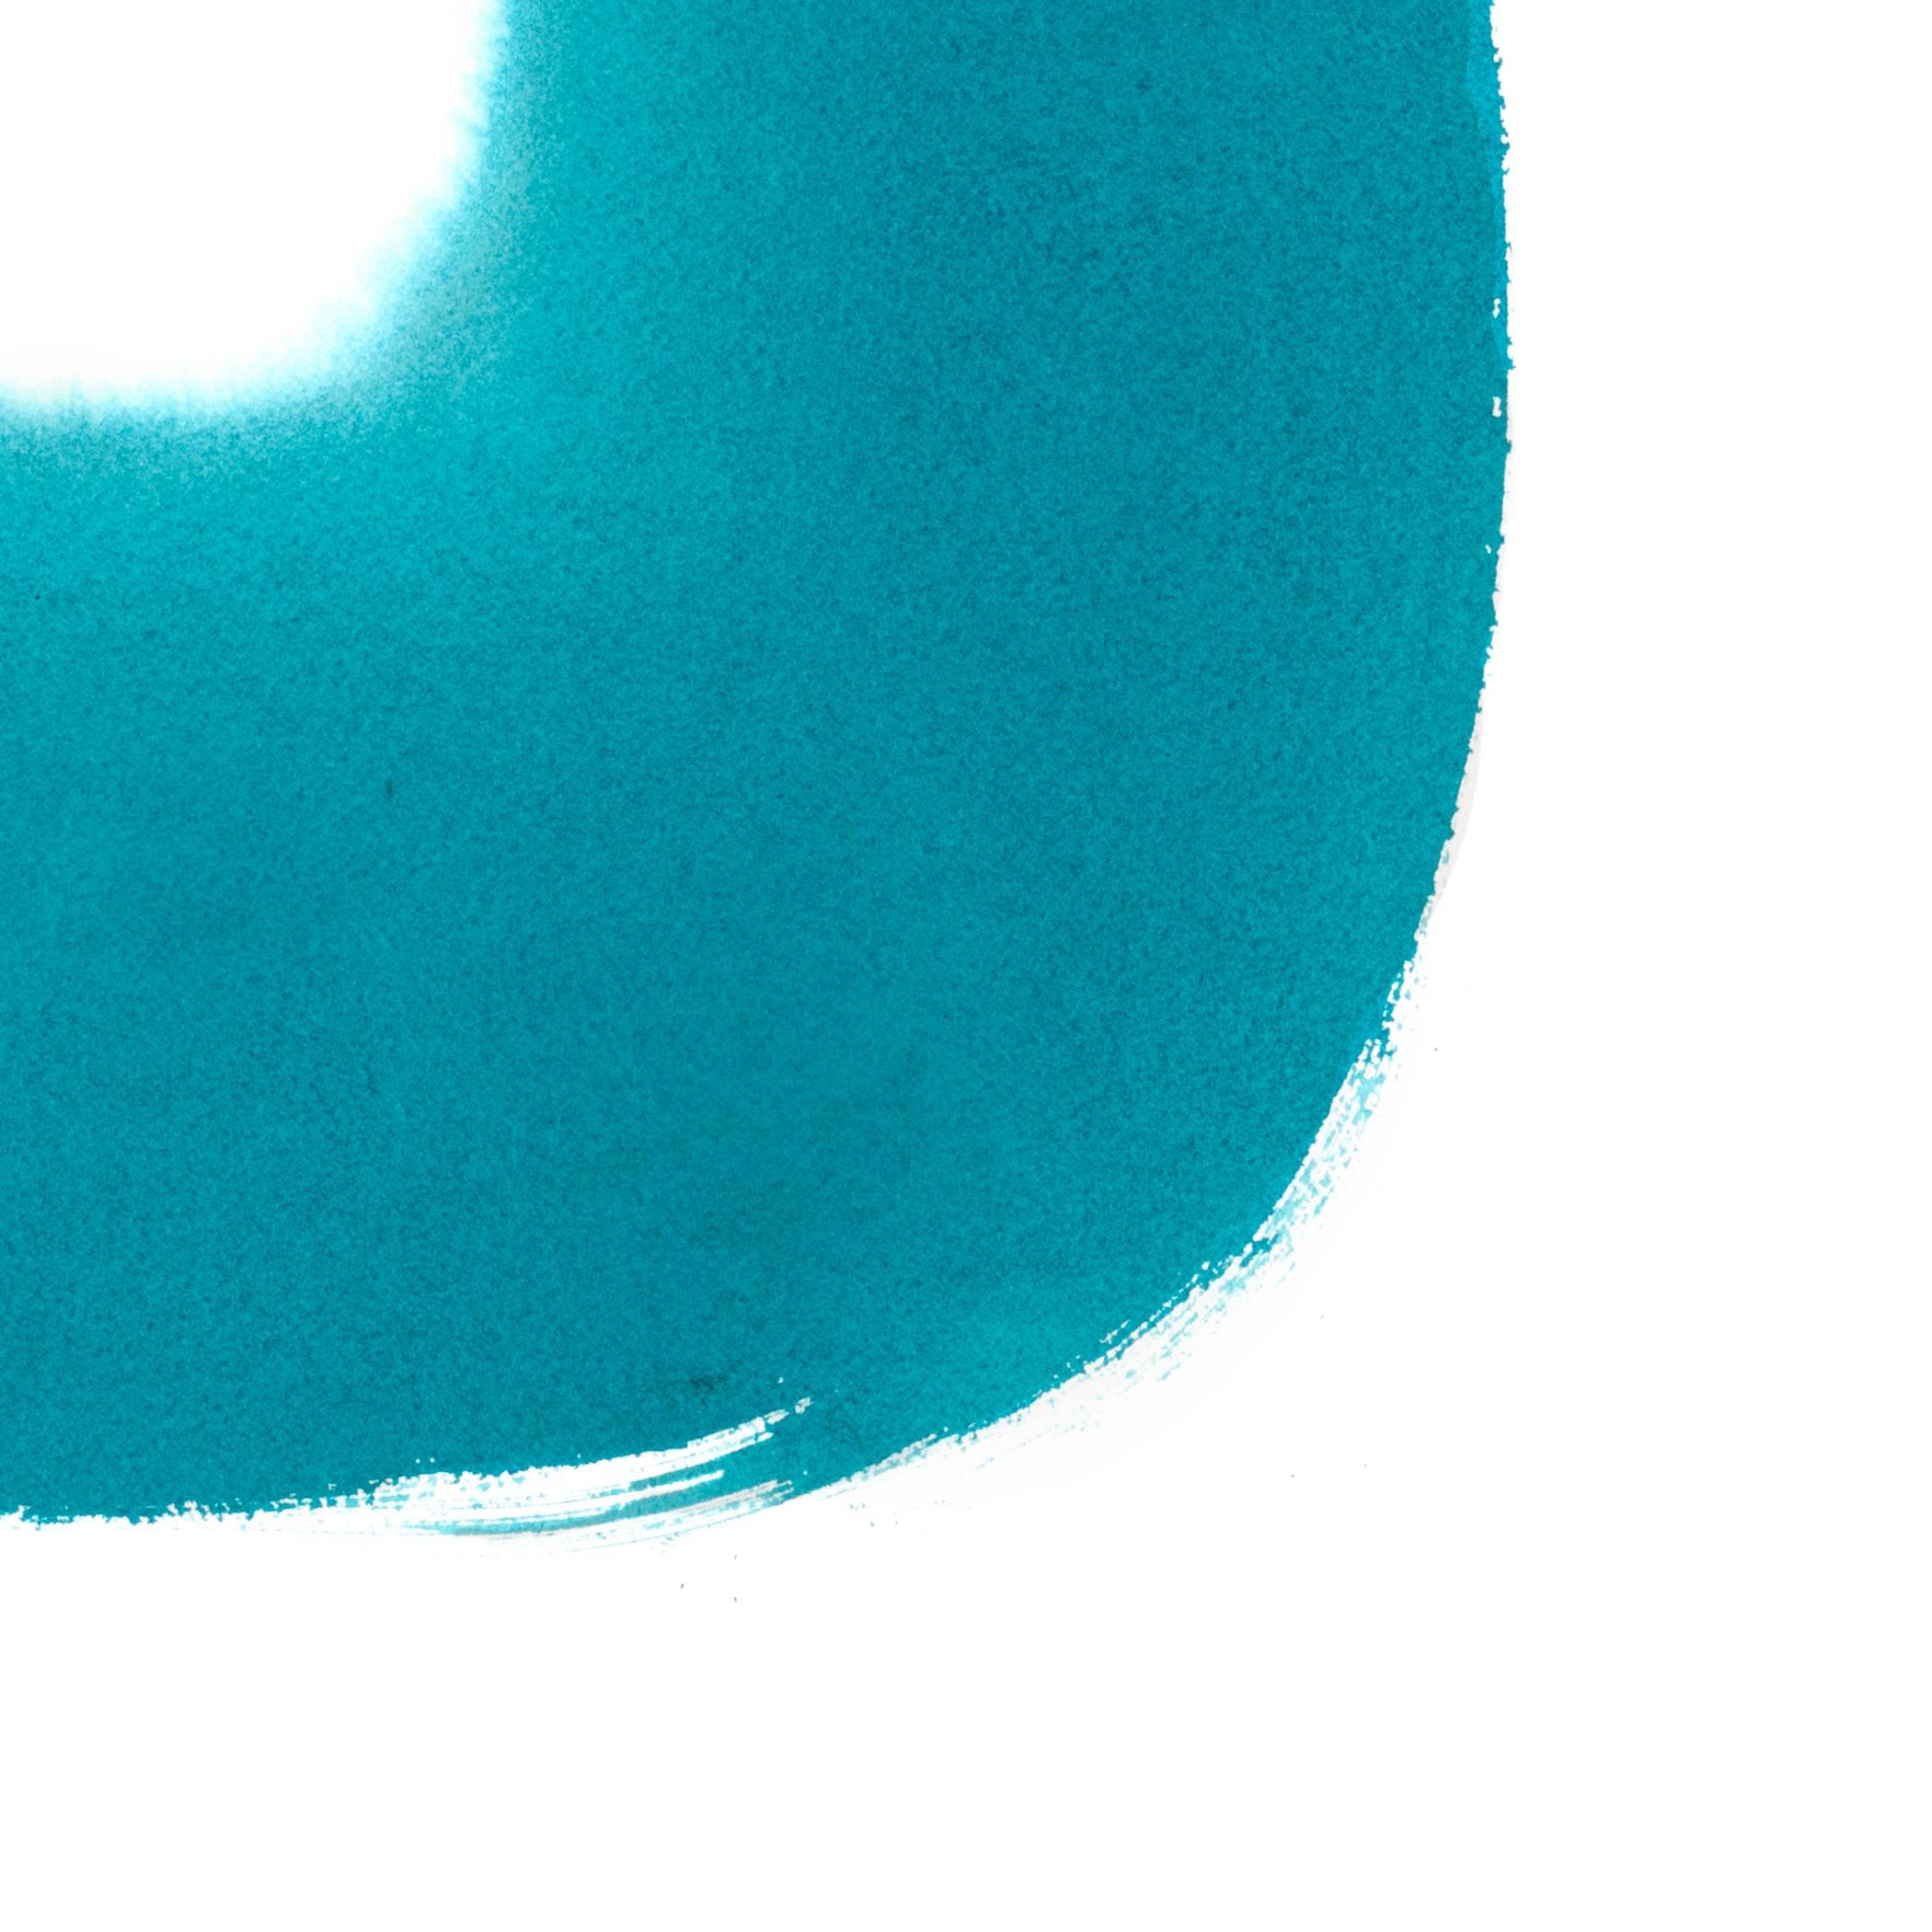 Aperture in Turquoise XXVII_Edition of 20 - Abstract Geometric Print by Véronique Gambier